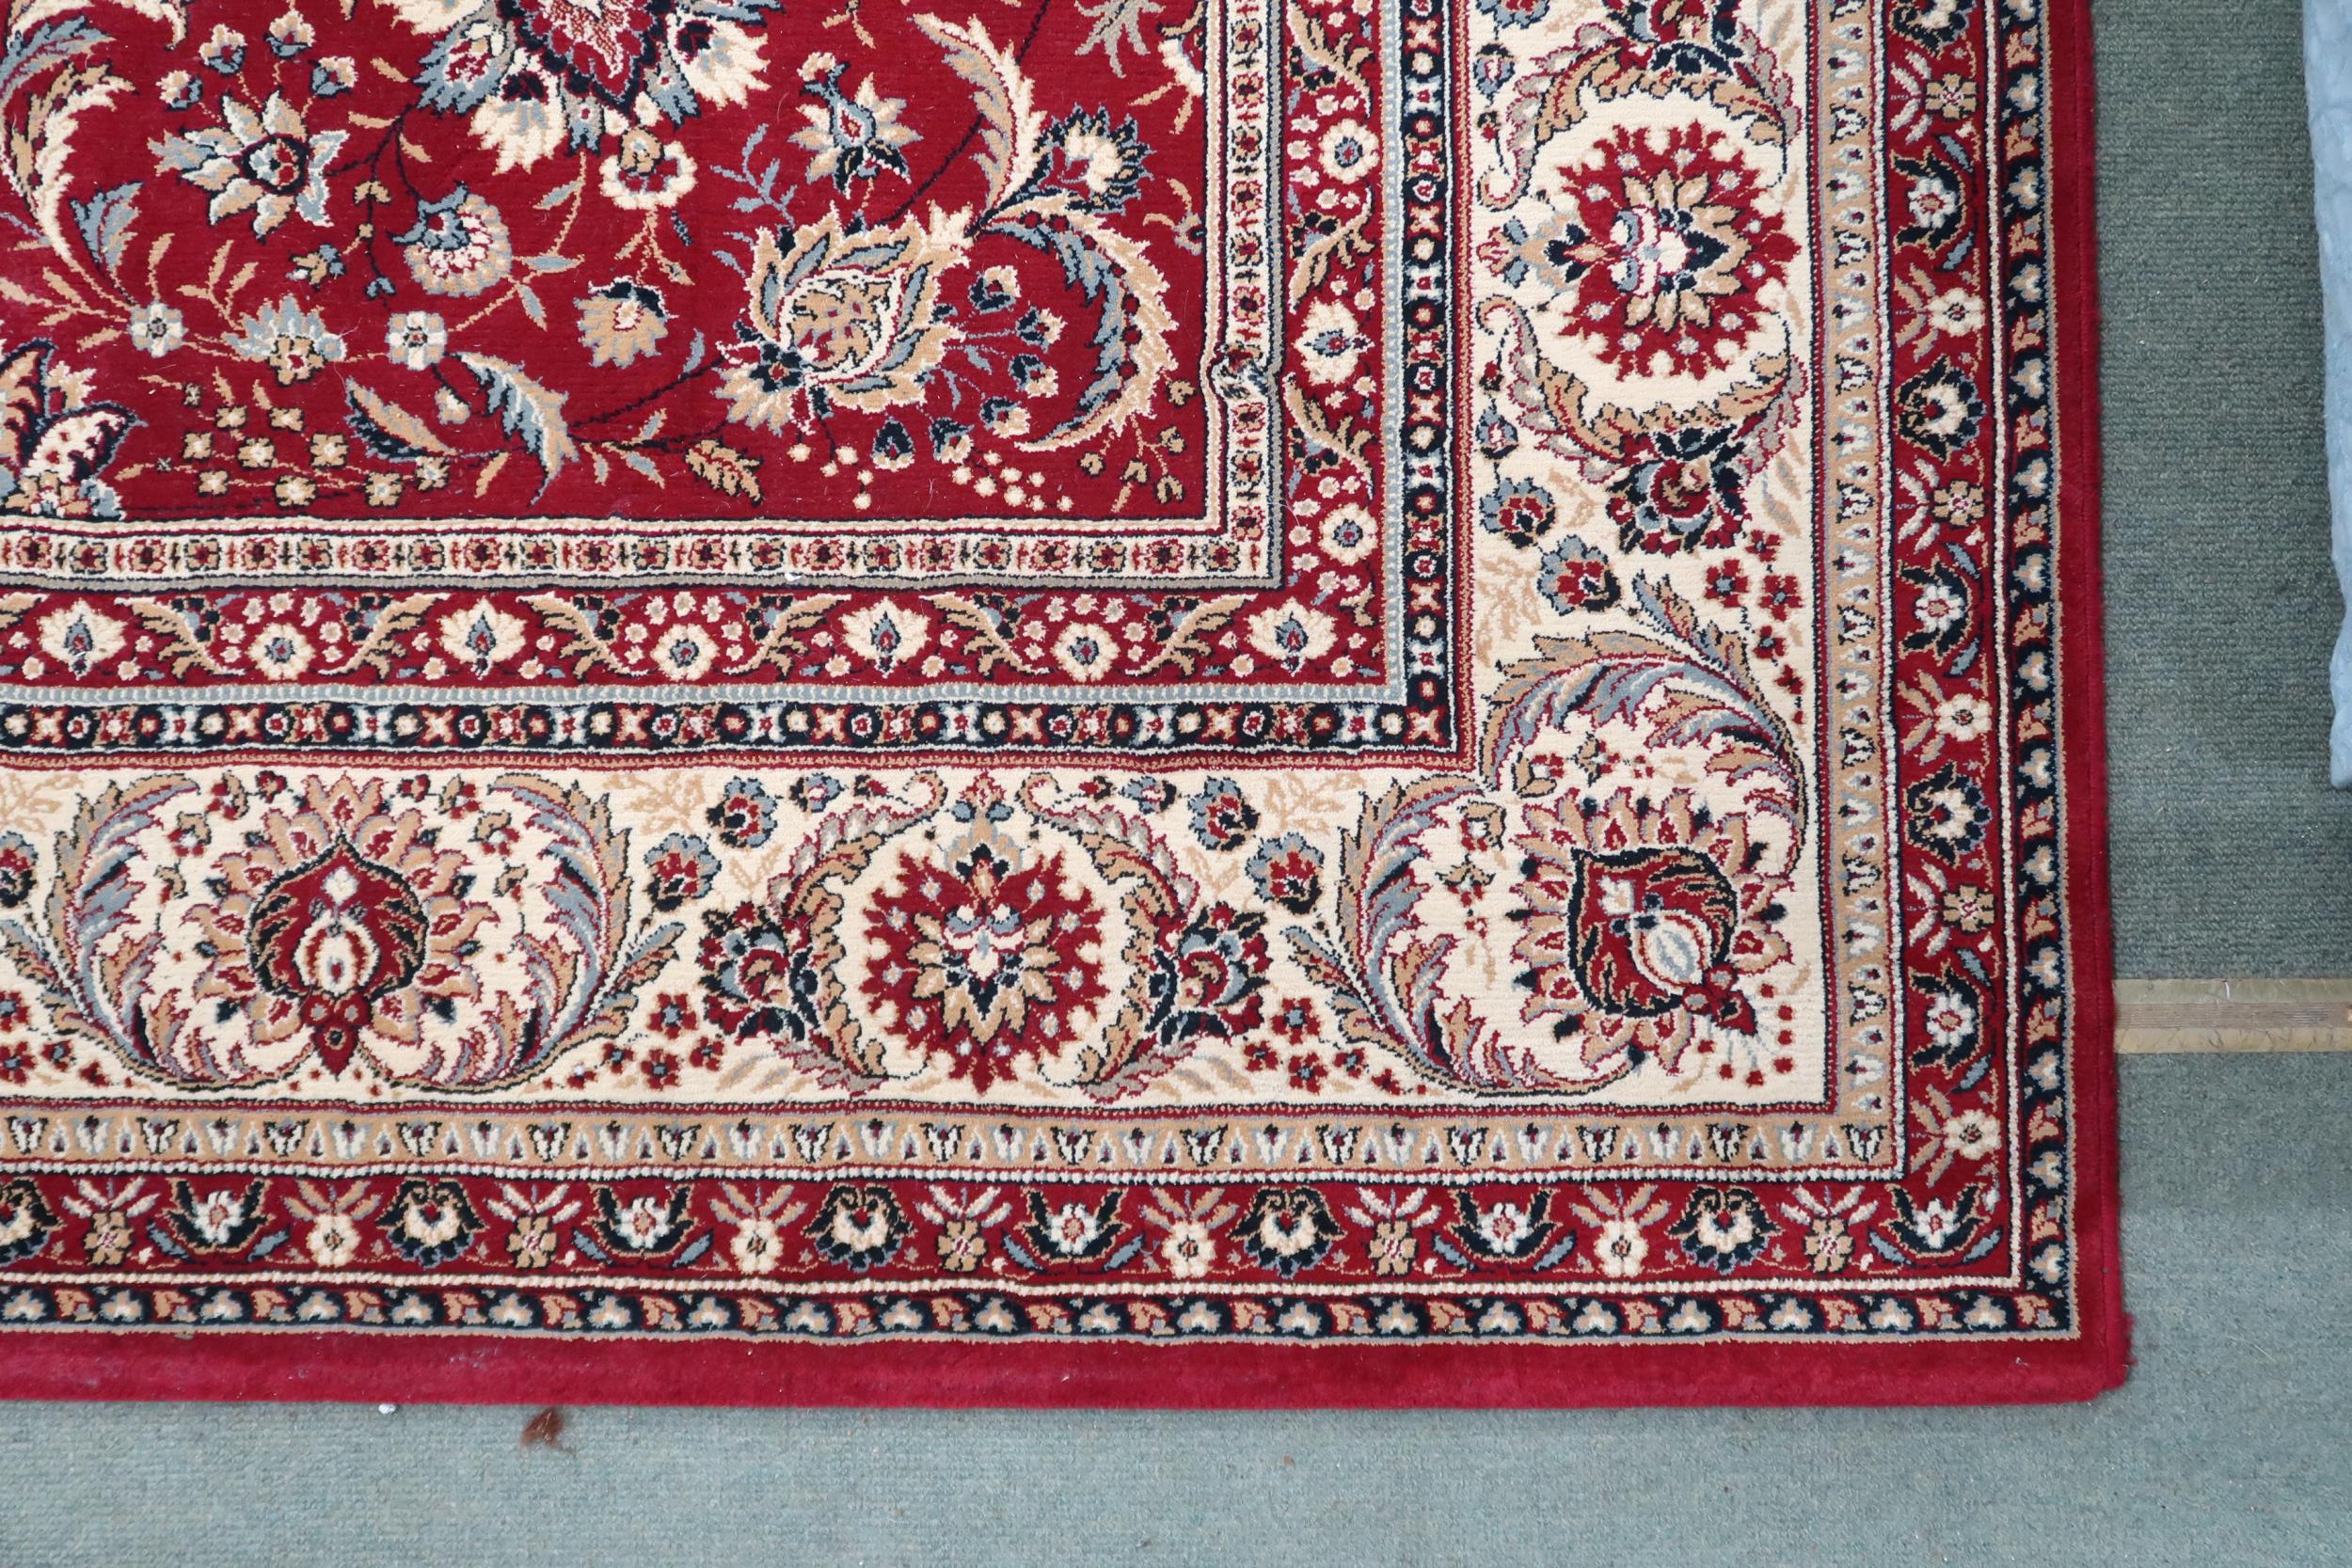 A contemporary Kasbahs by Lano red ground Zeigler style rug with floral/foliate patterned ground - Image 2 of 5